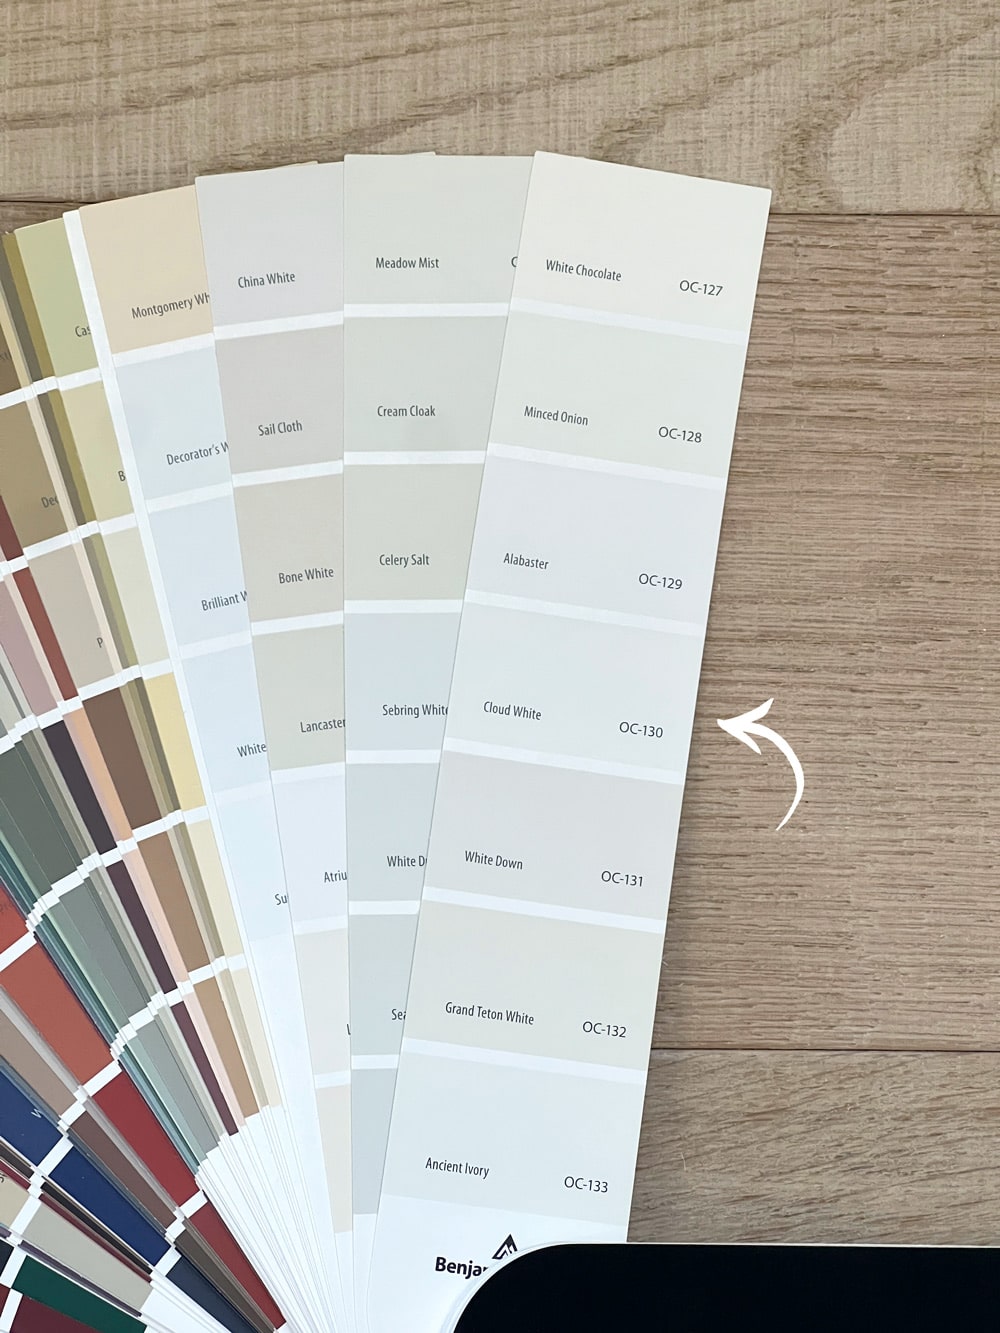 The 10 Best White Paint Colors (as chosen by designers) - Jenna